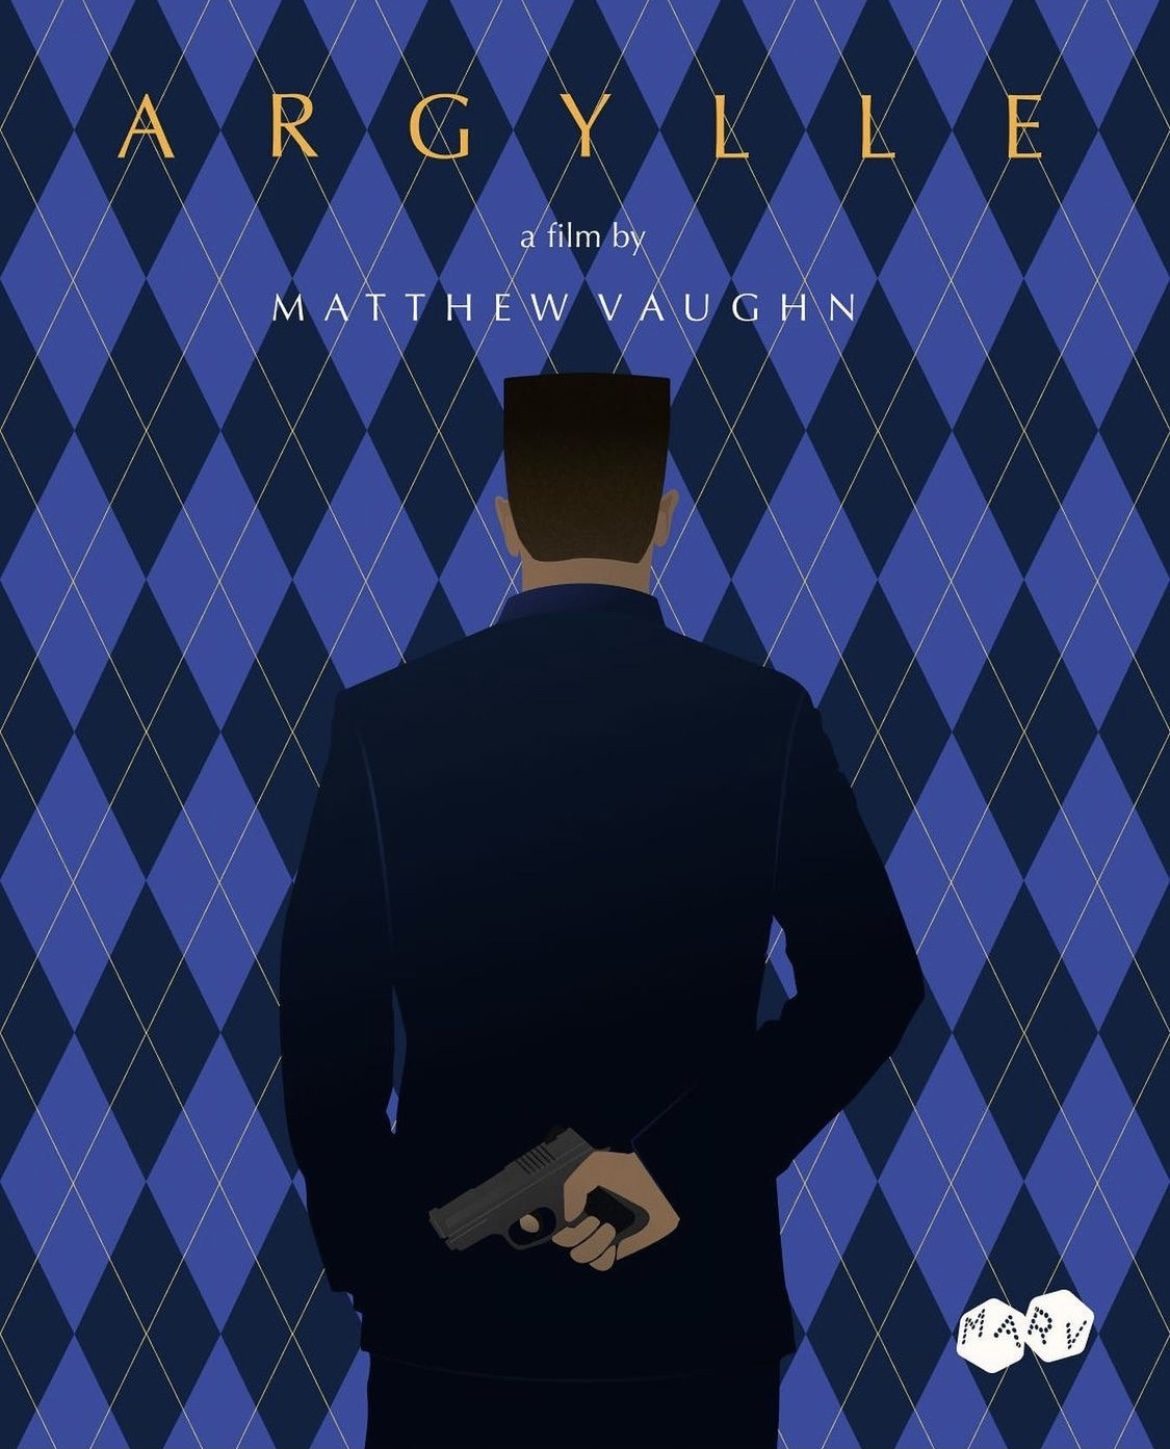 "Argylle a film by Matthew Vaughn" with a character with his back to the viewer, hiding a gun behind his back - poster